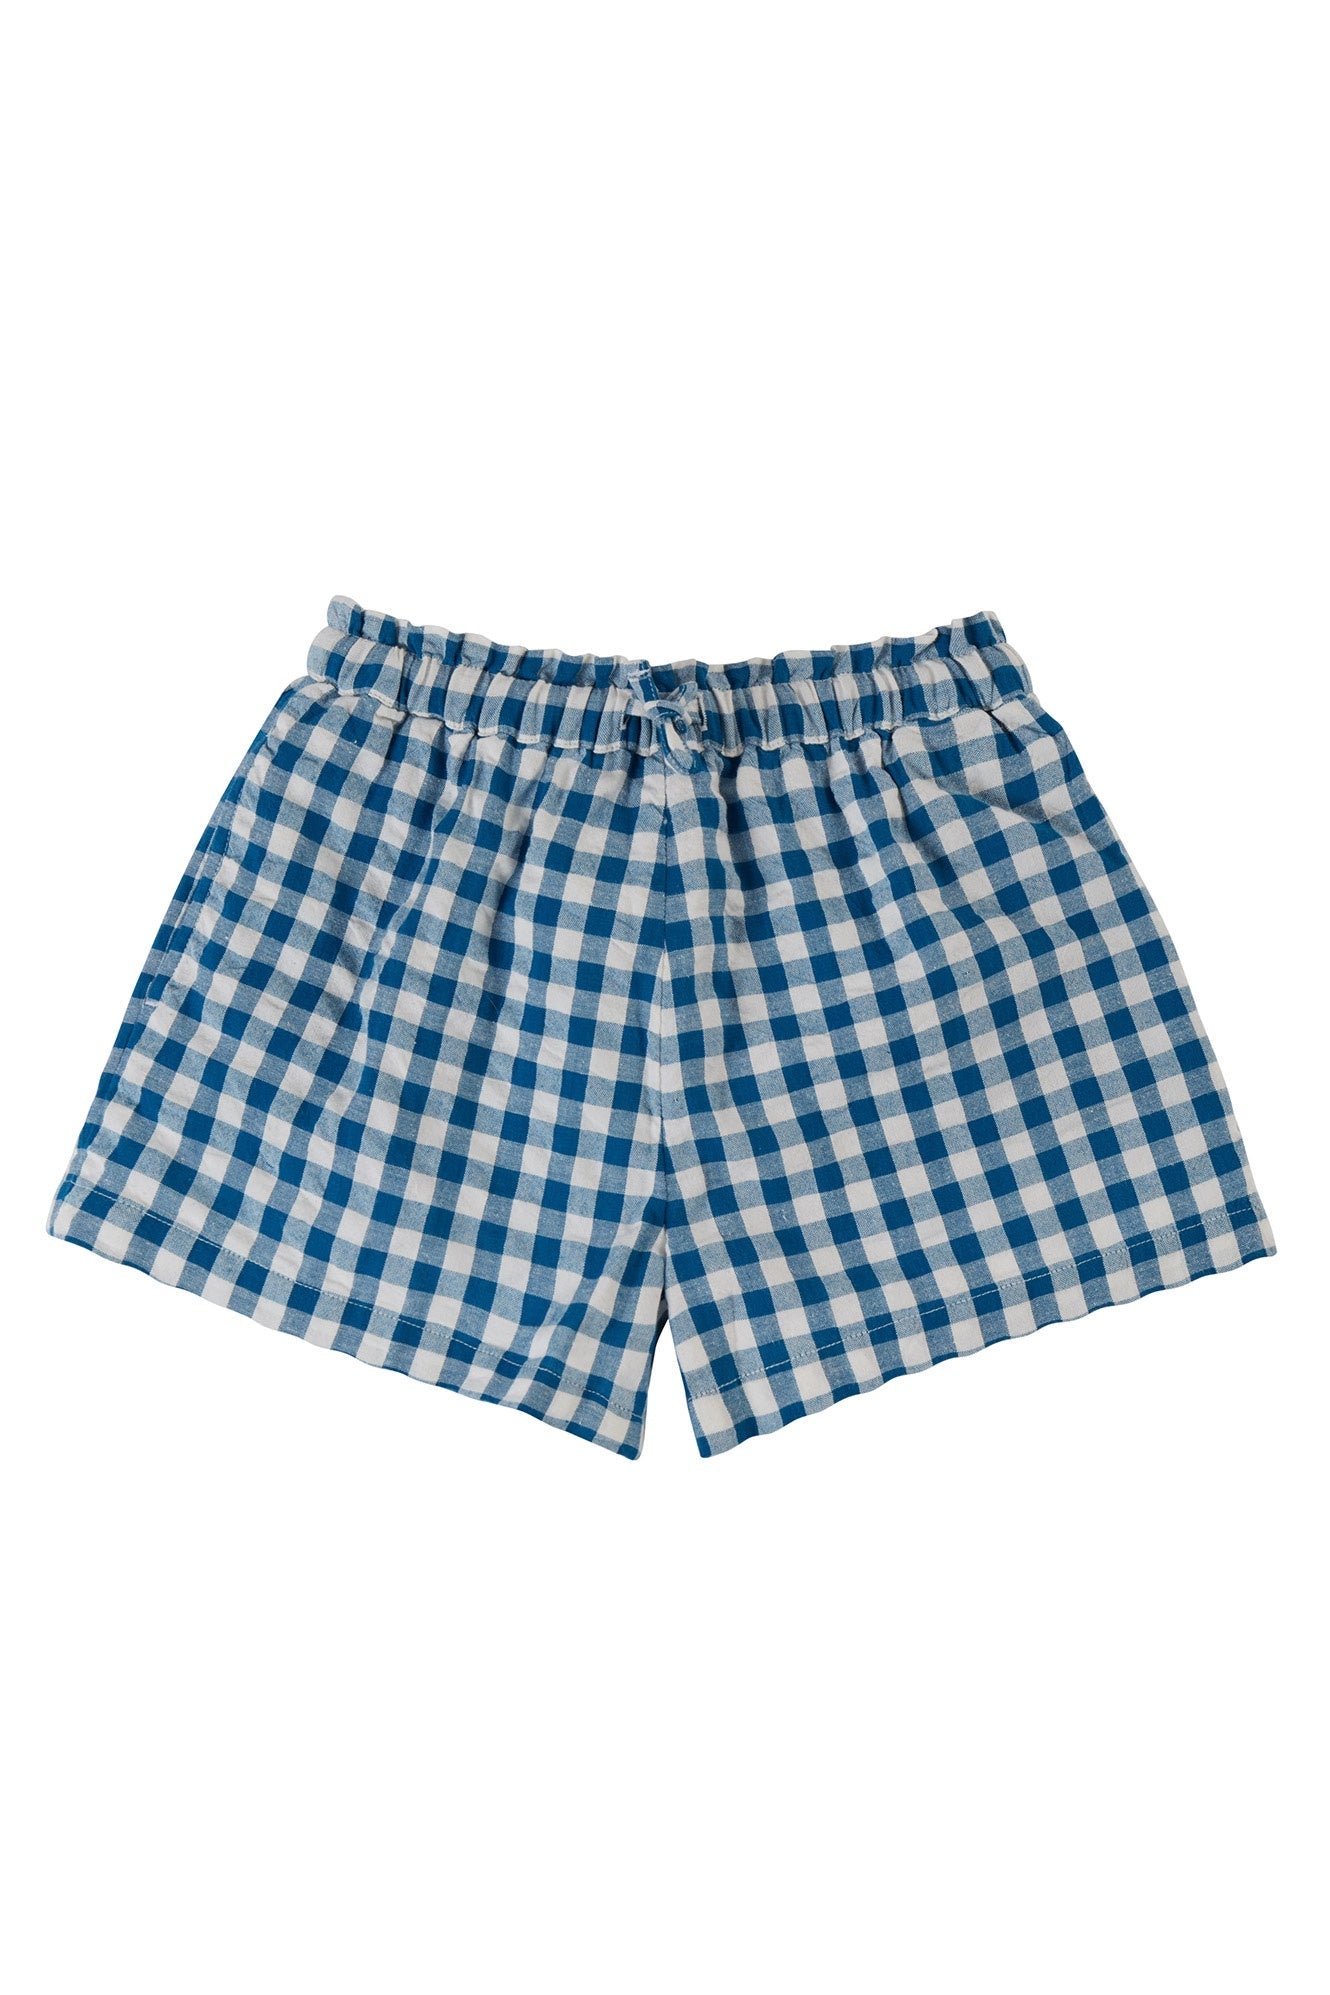 Frugi Catarina Shorts in Deep Sea Check-Kids-Ohh! By Gum - Shop Sustainable